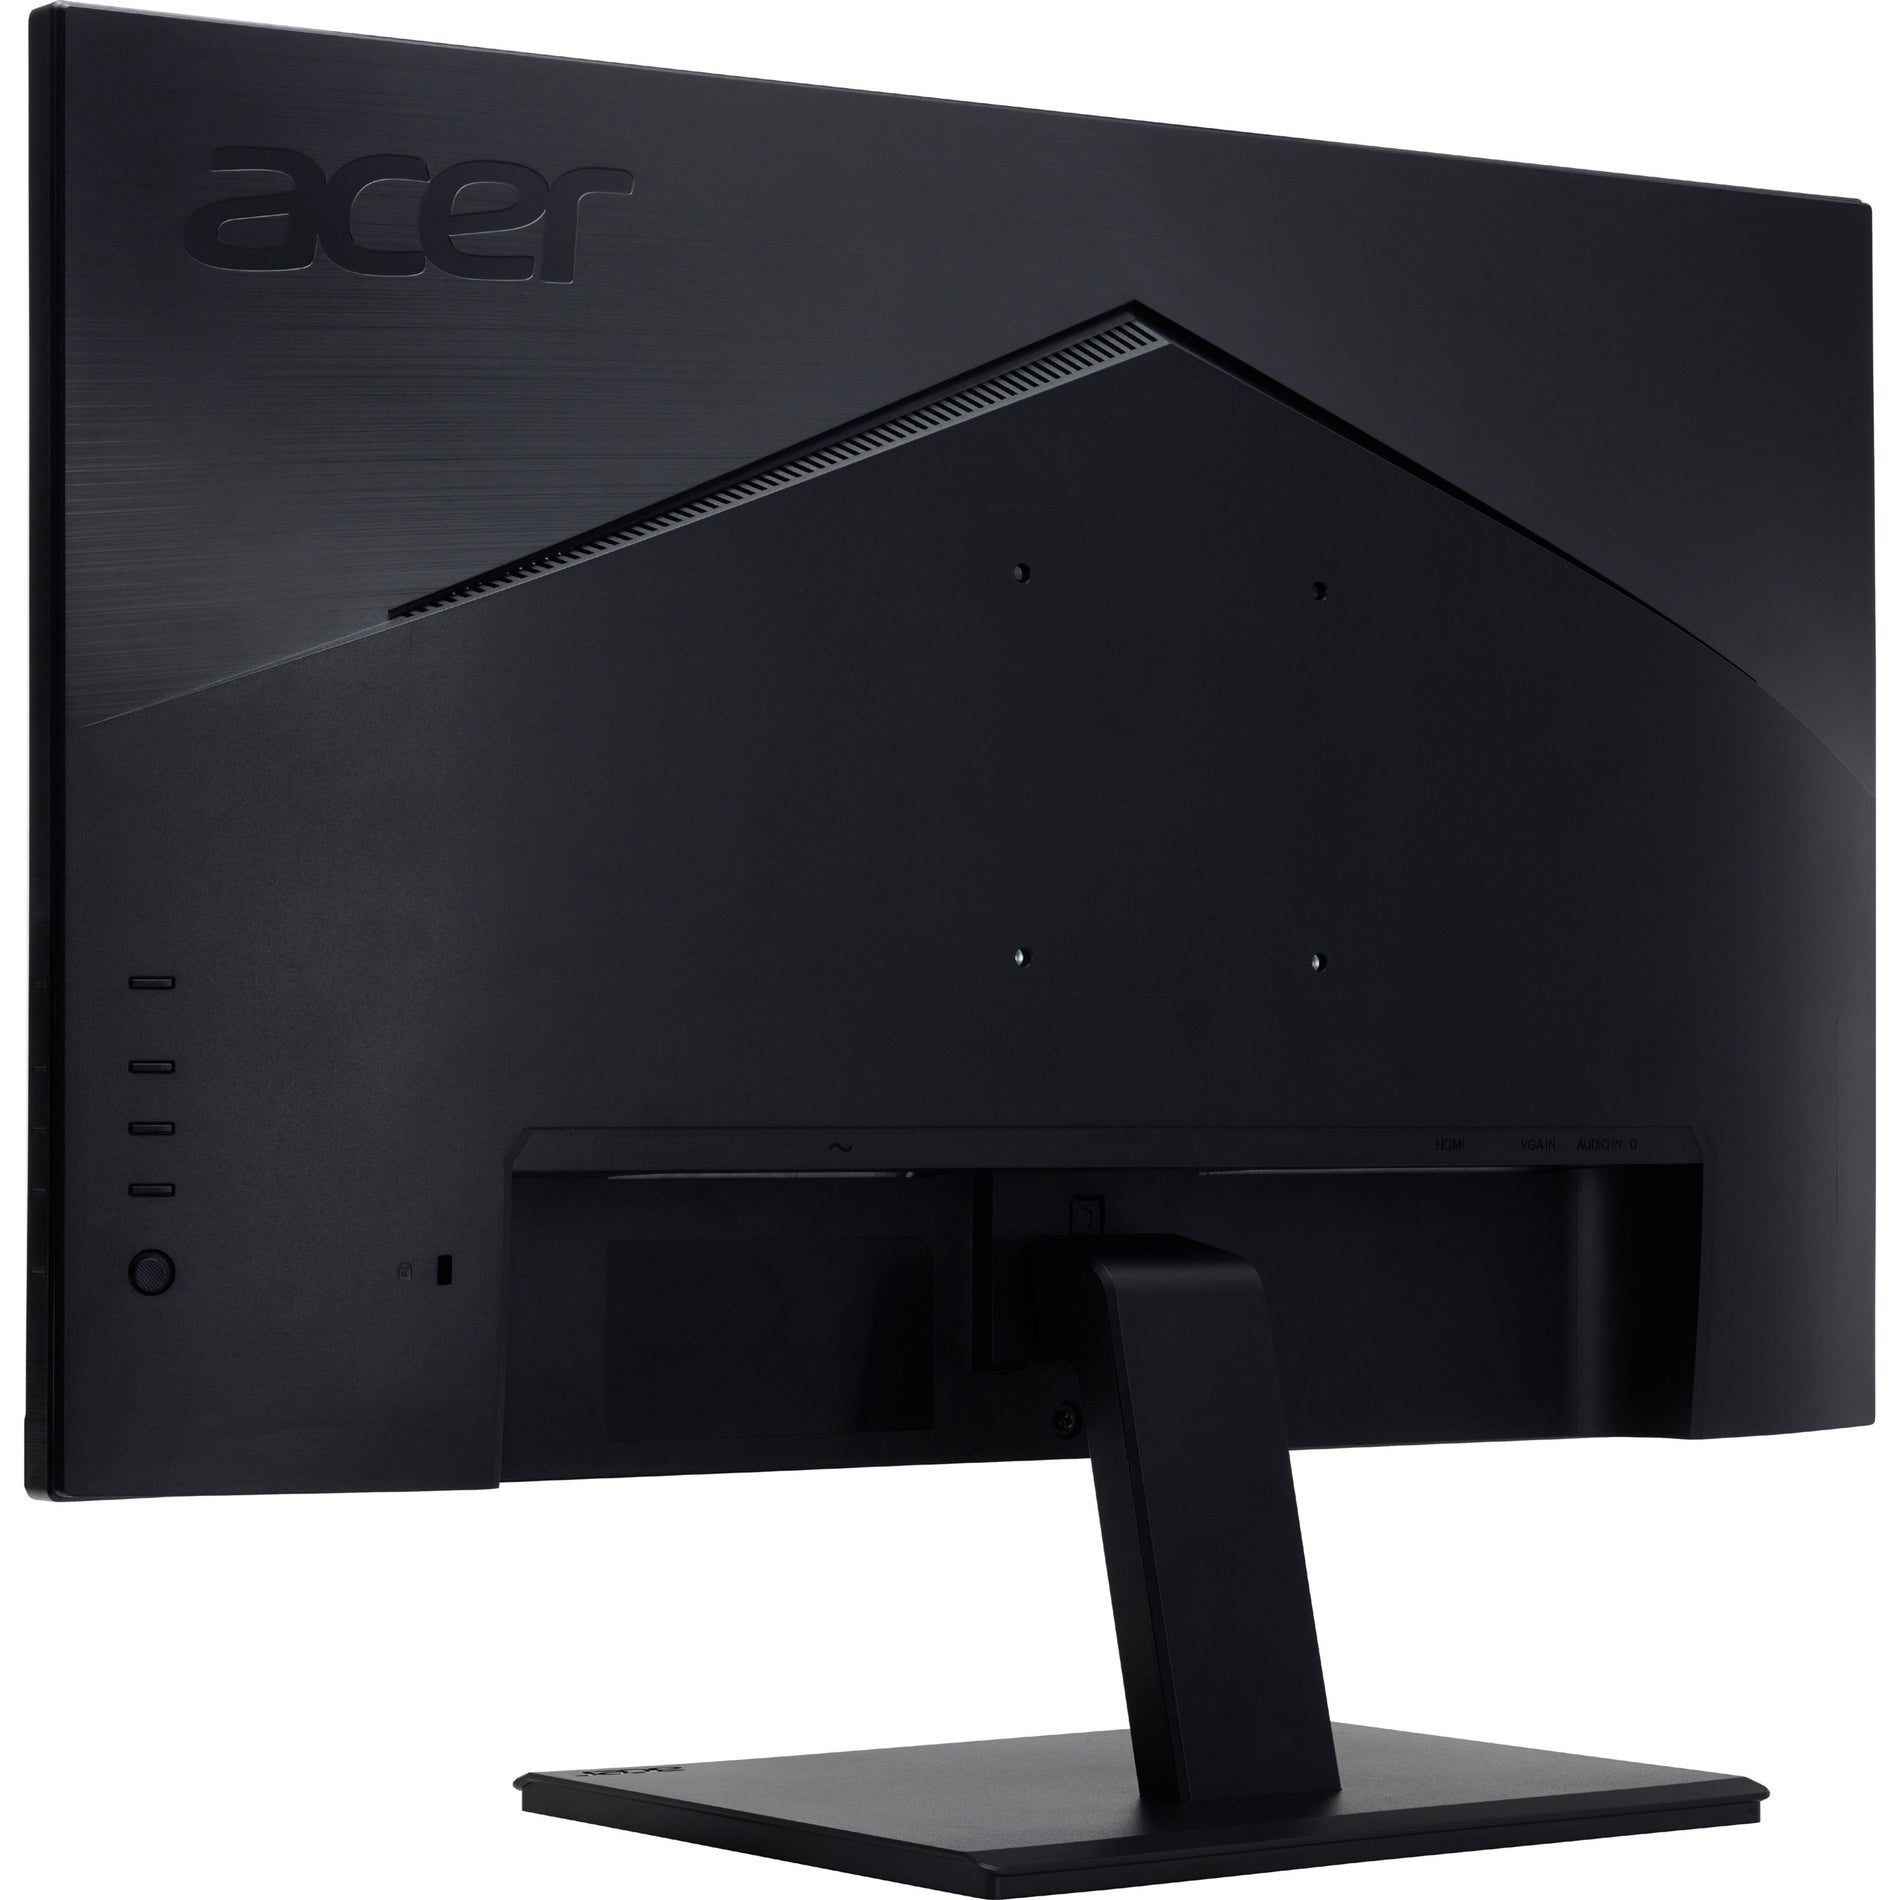 Acer UM.QV7AA.A01 V247Y A 23.8" Full HD LCD Monitor, 75Hz Refresh Rate, 6-bit+FRC Color Depth, TCO Certified